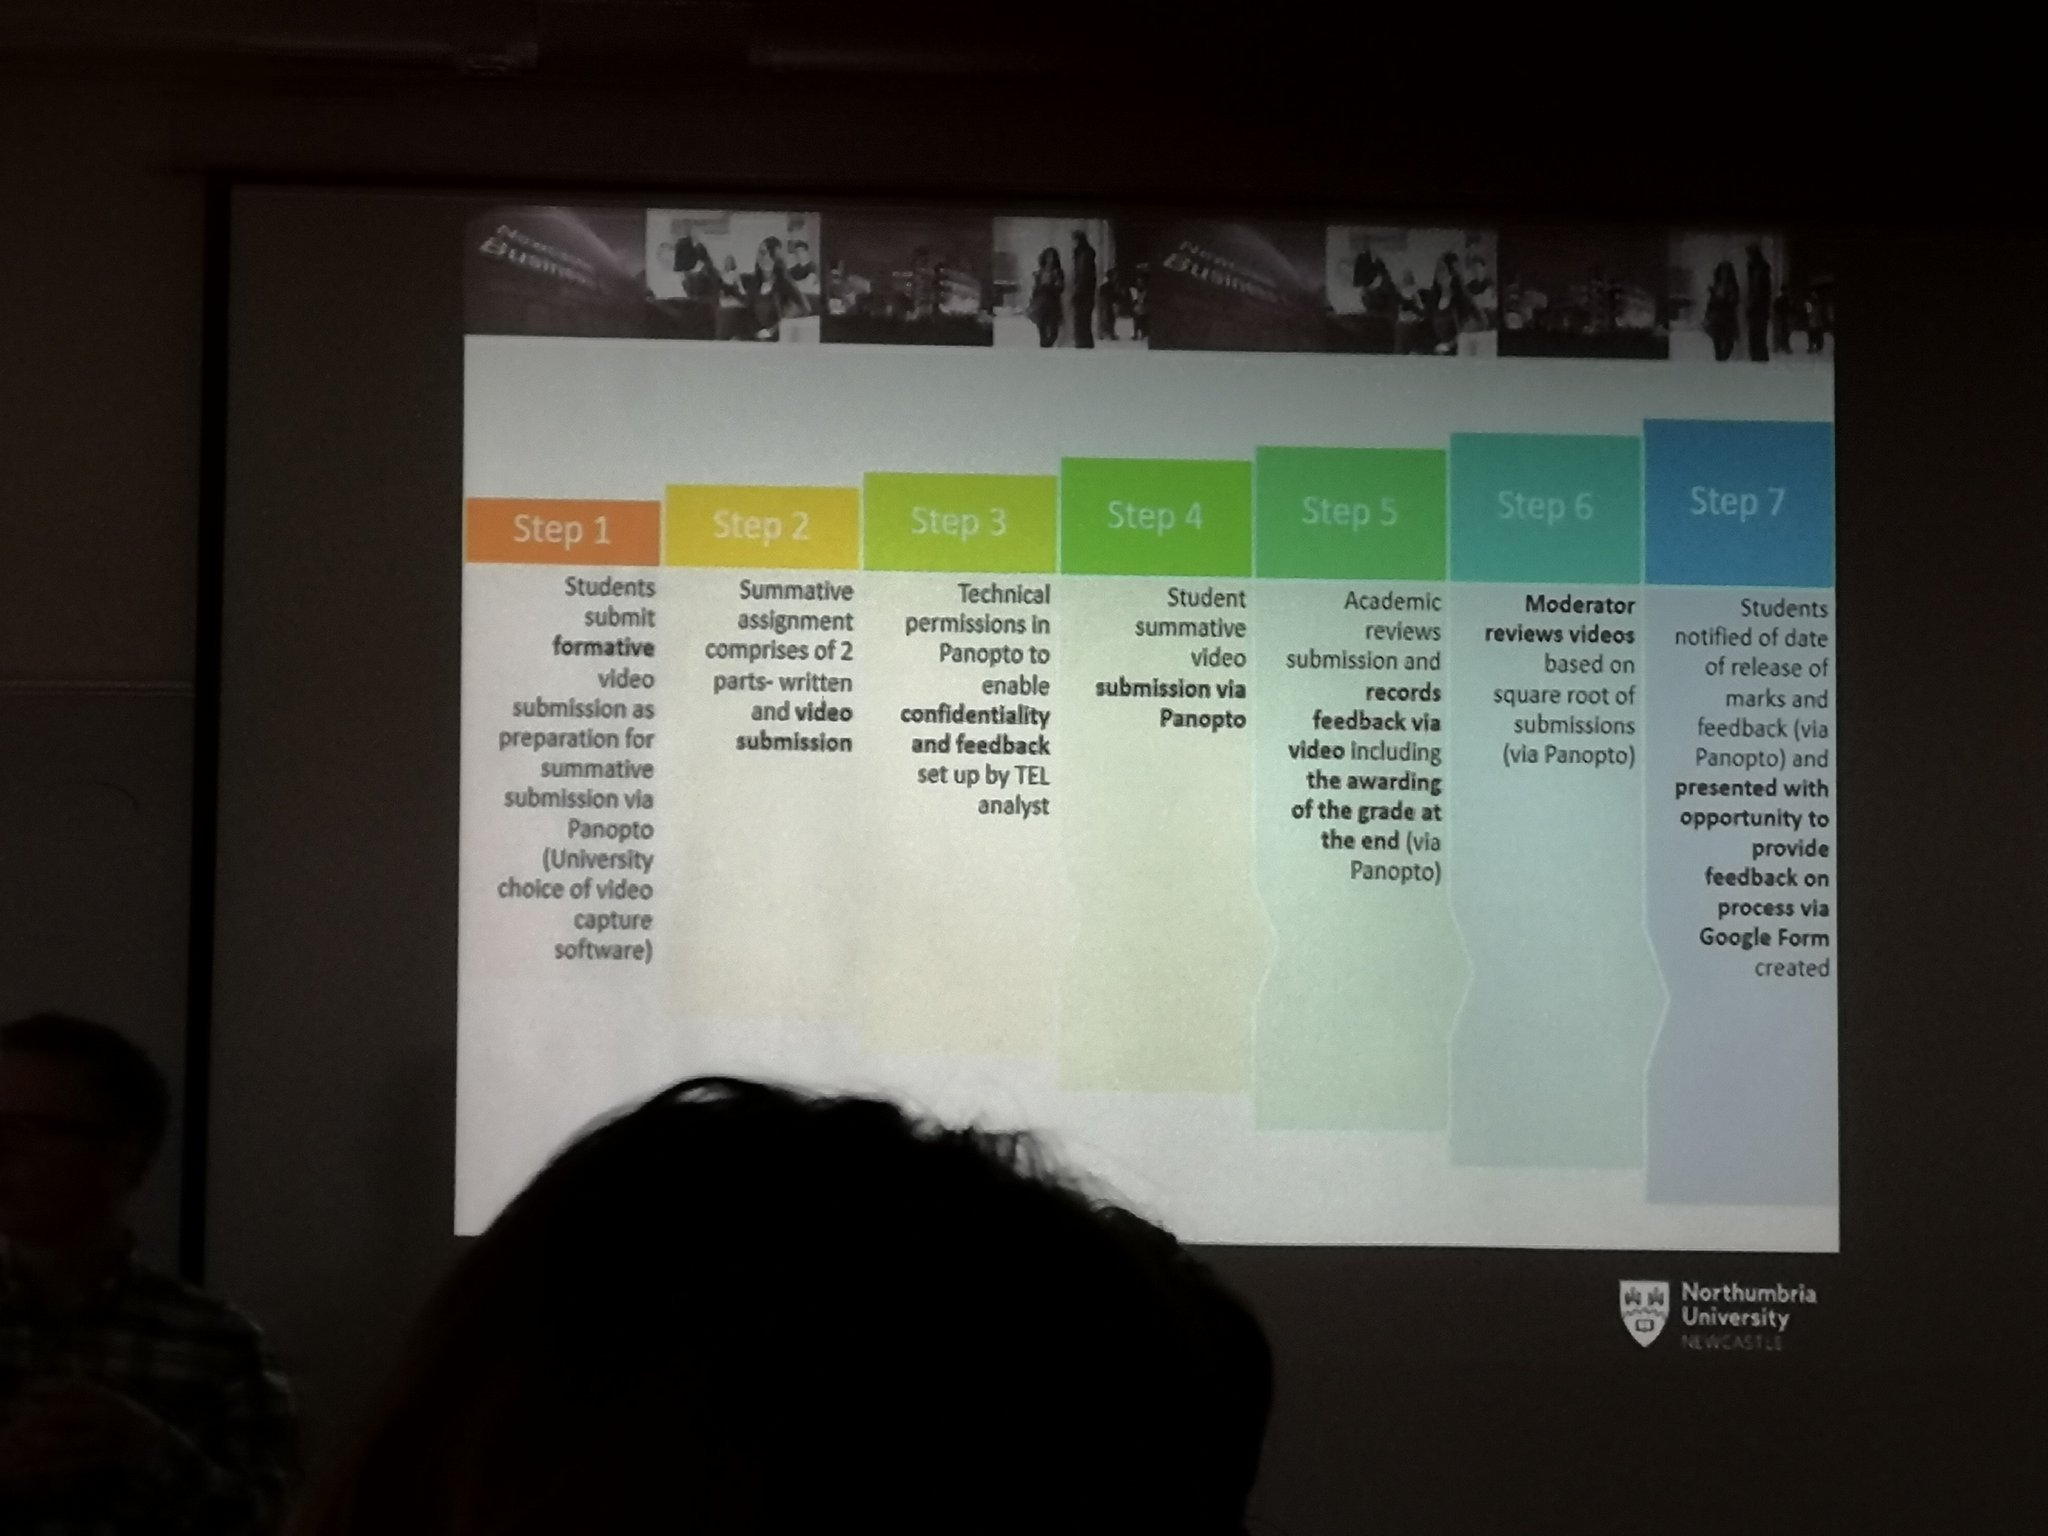 The steps in video feedback from Northumbria University